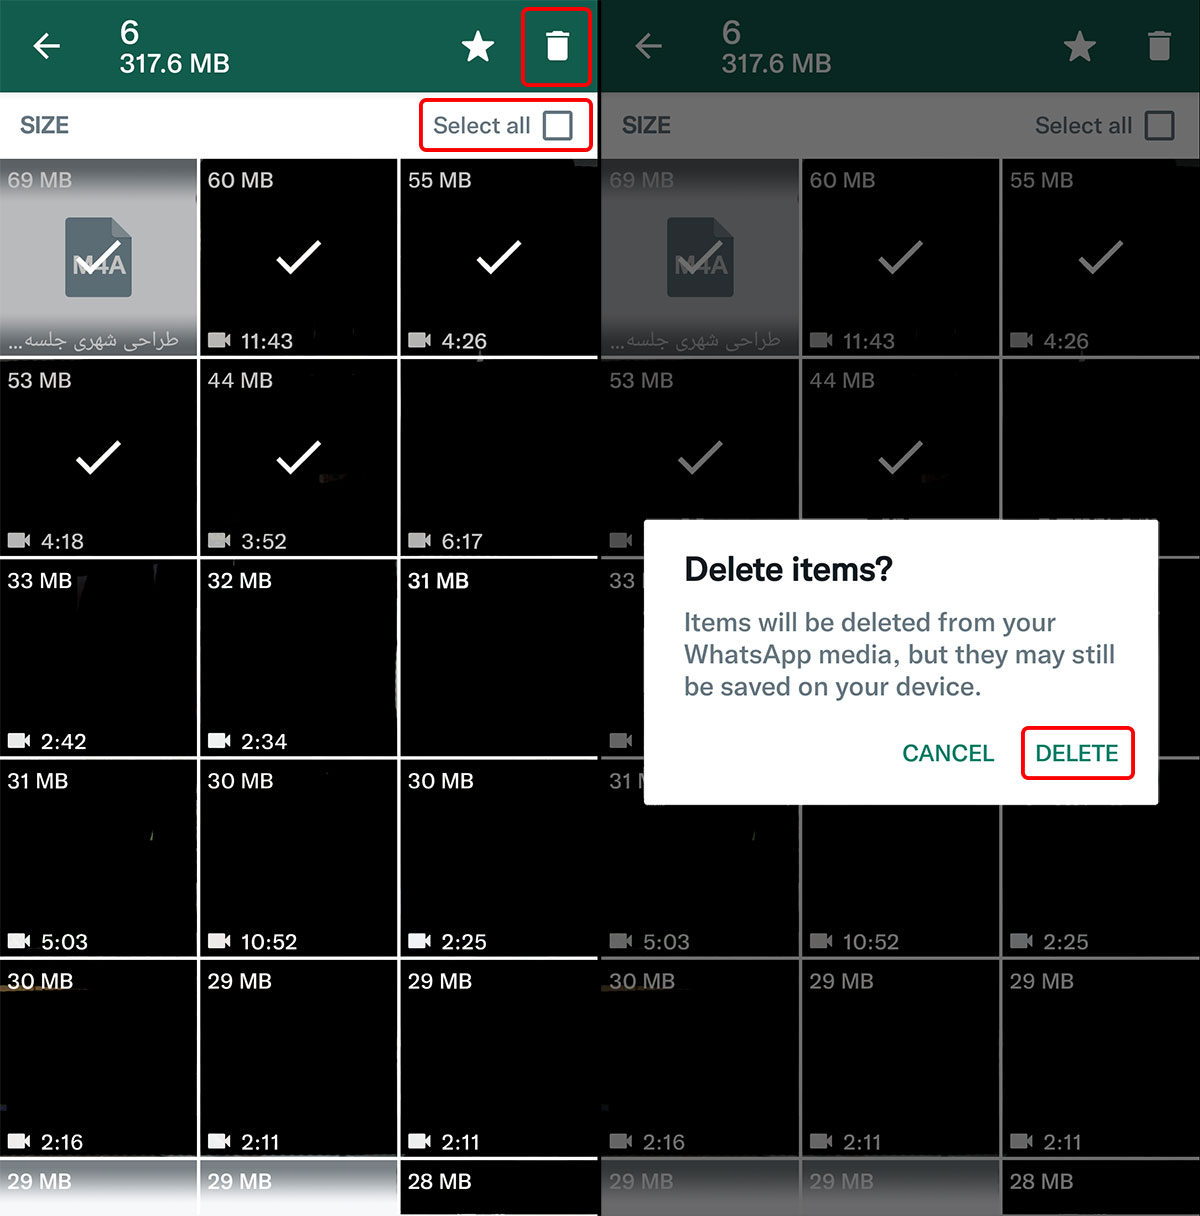 Manage storage space in WhatsApp